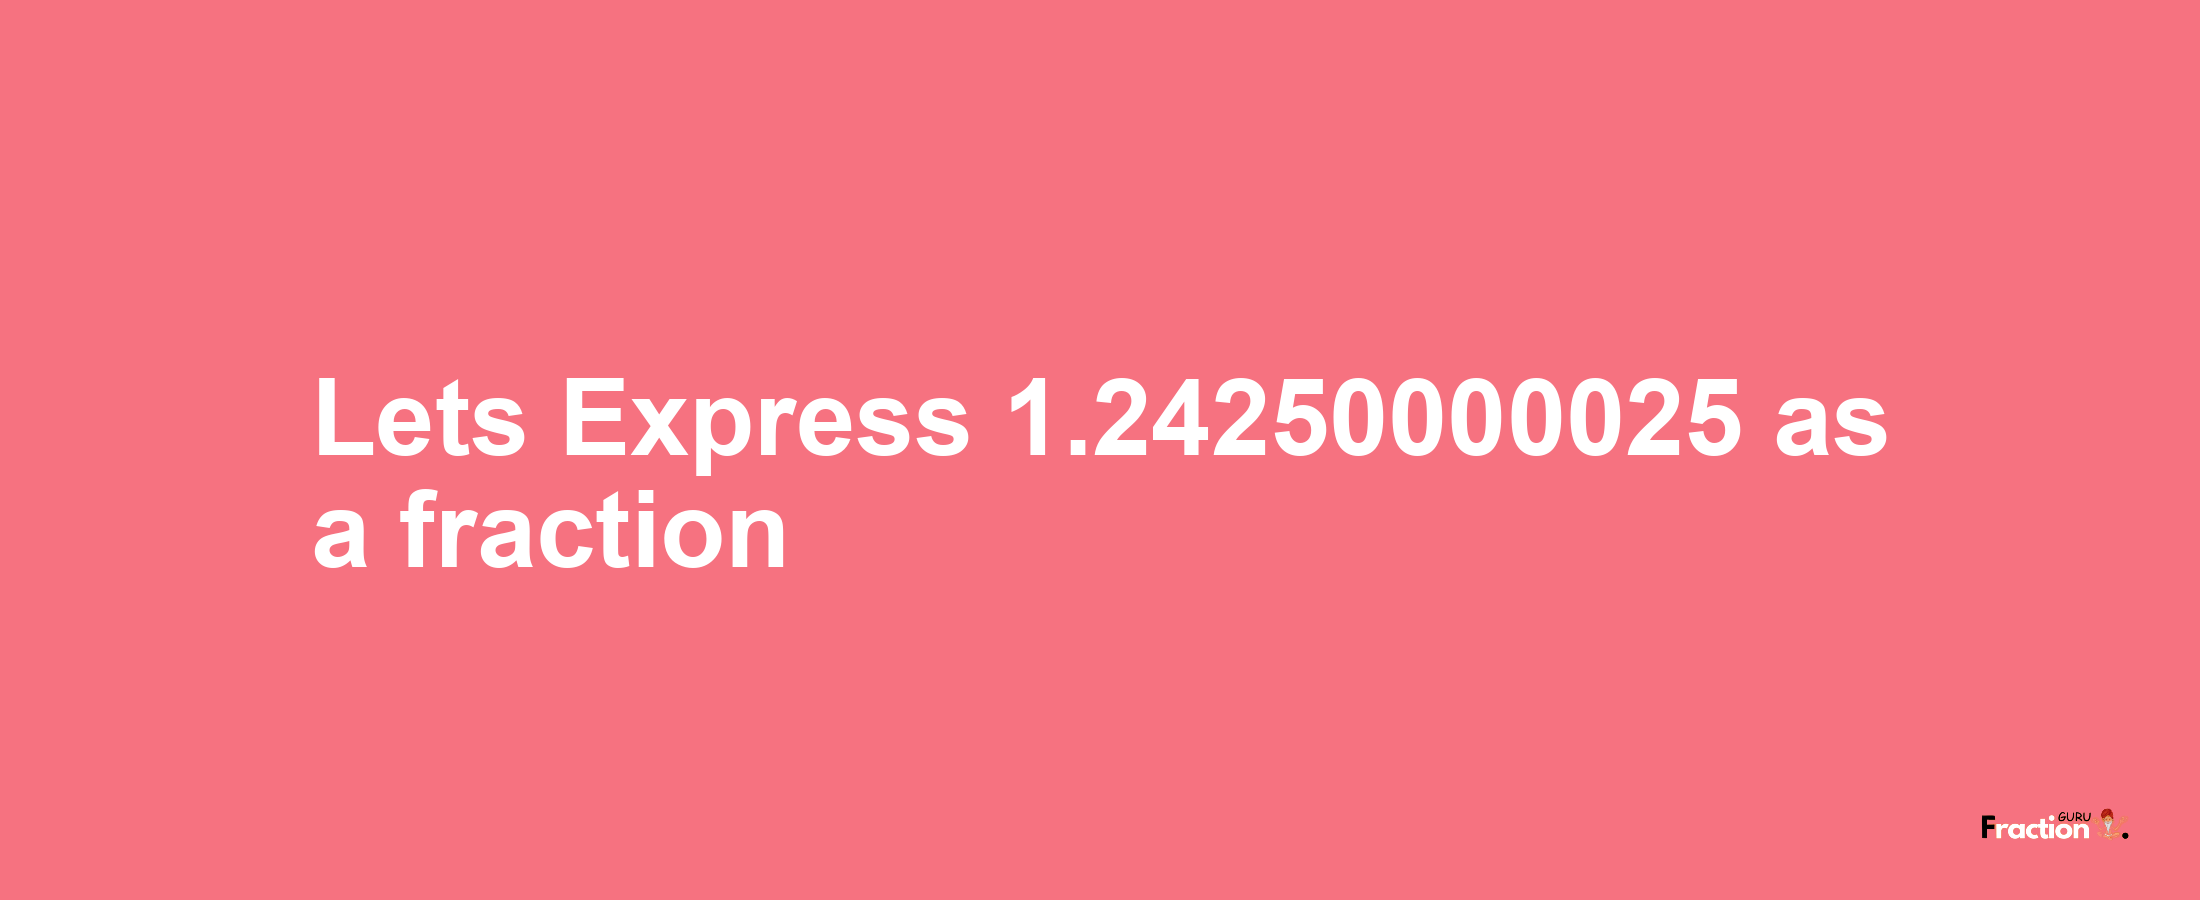 Lets Express 1.24250000025 as afraction